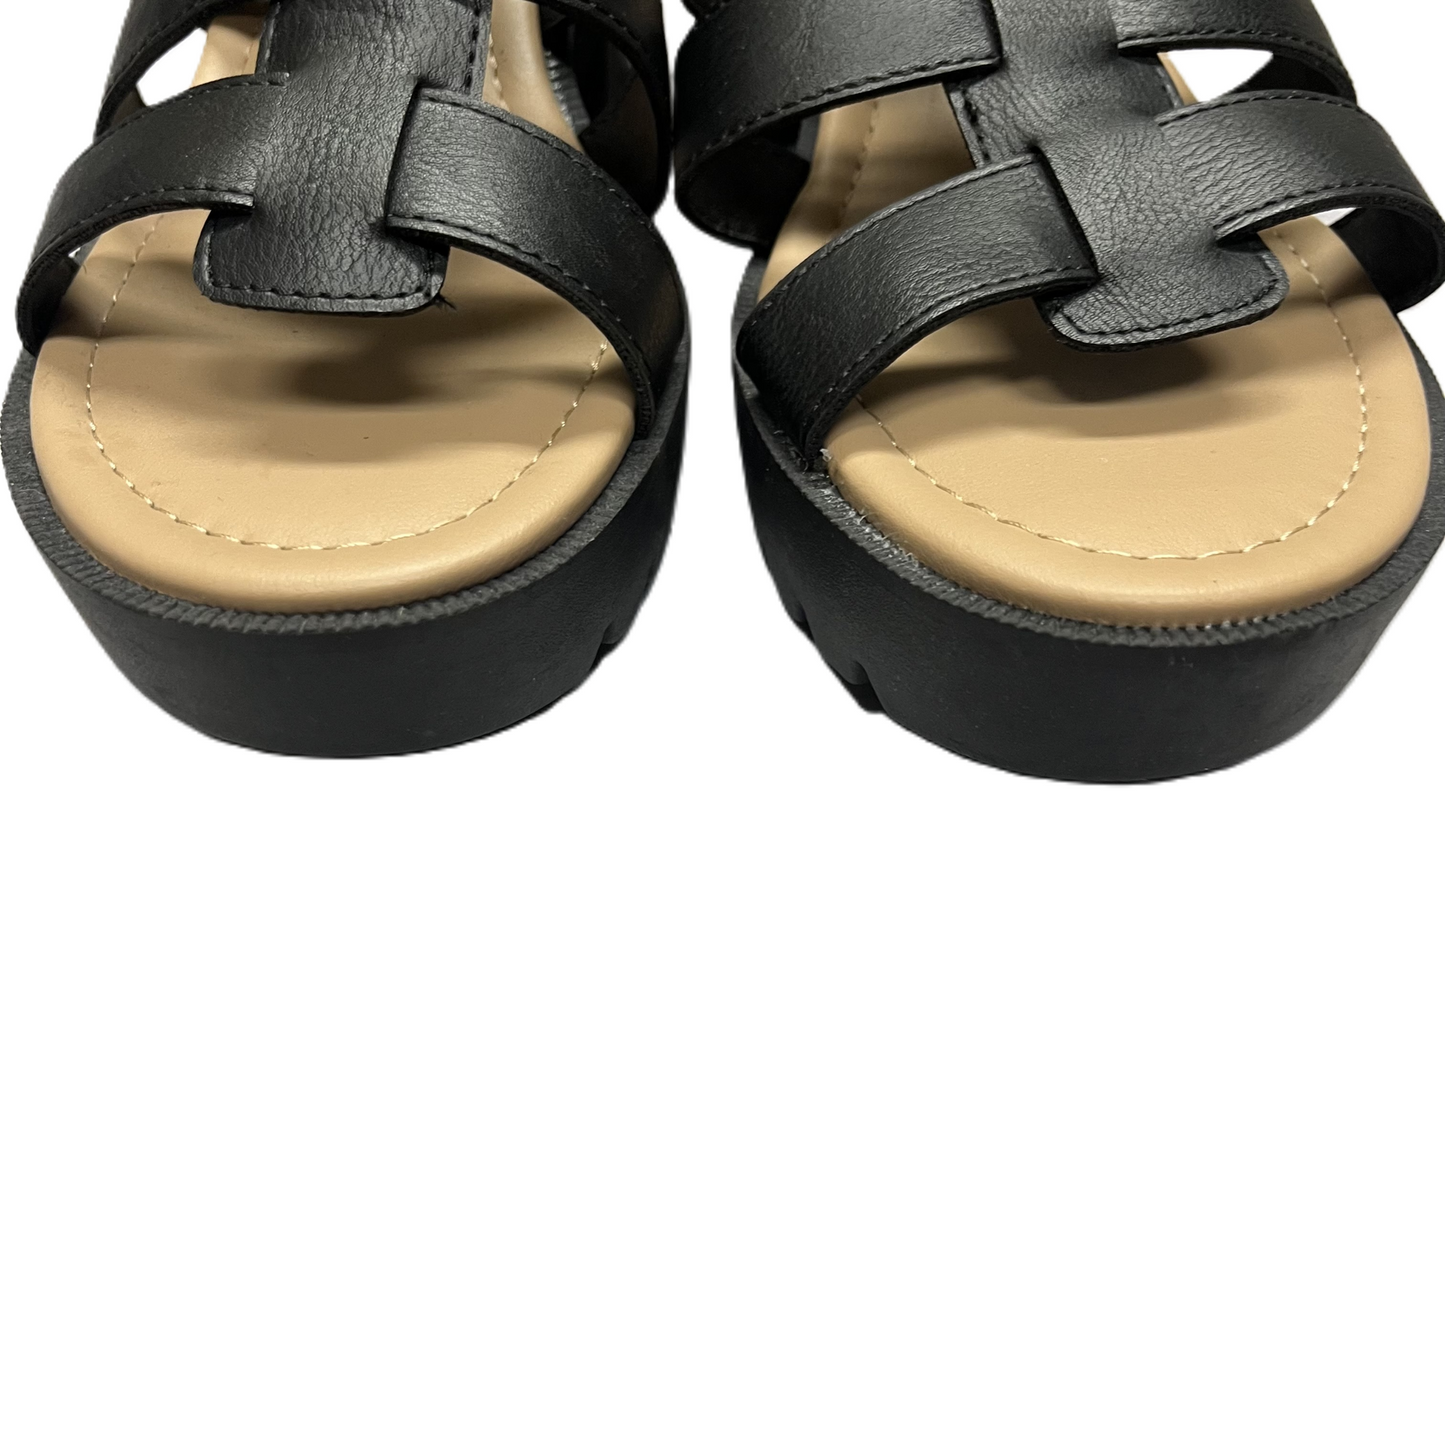 Black Sandals Heels Block By Sun and Stone, Size: 9